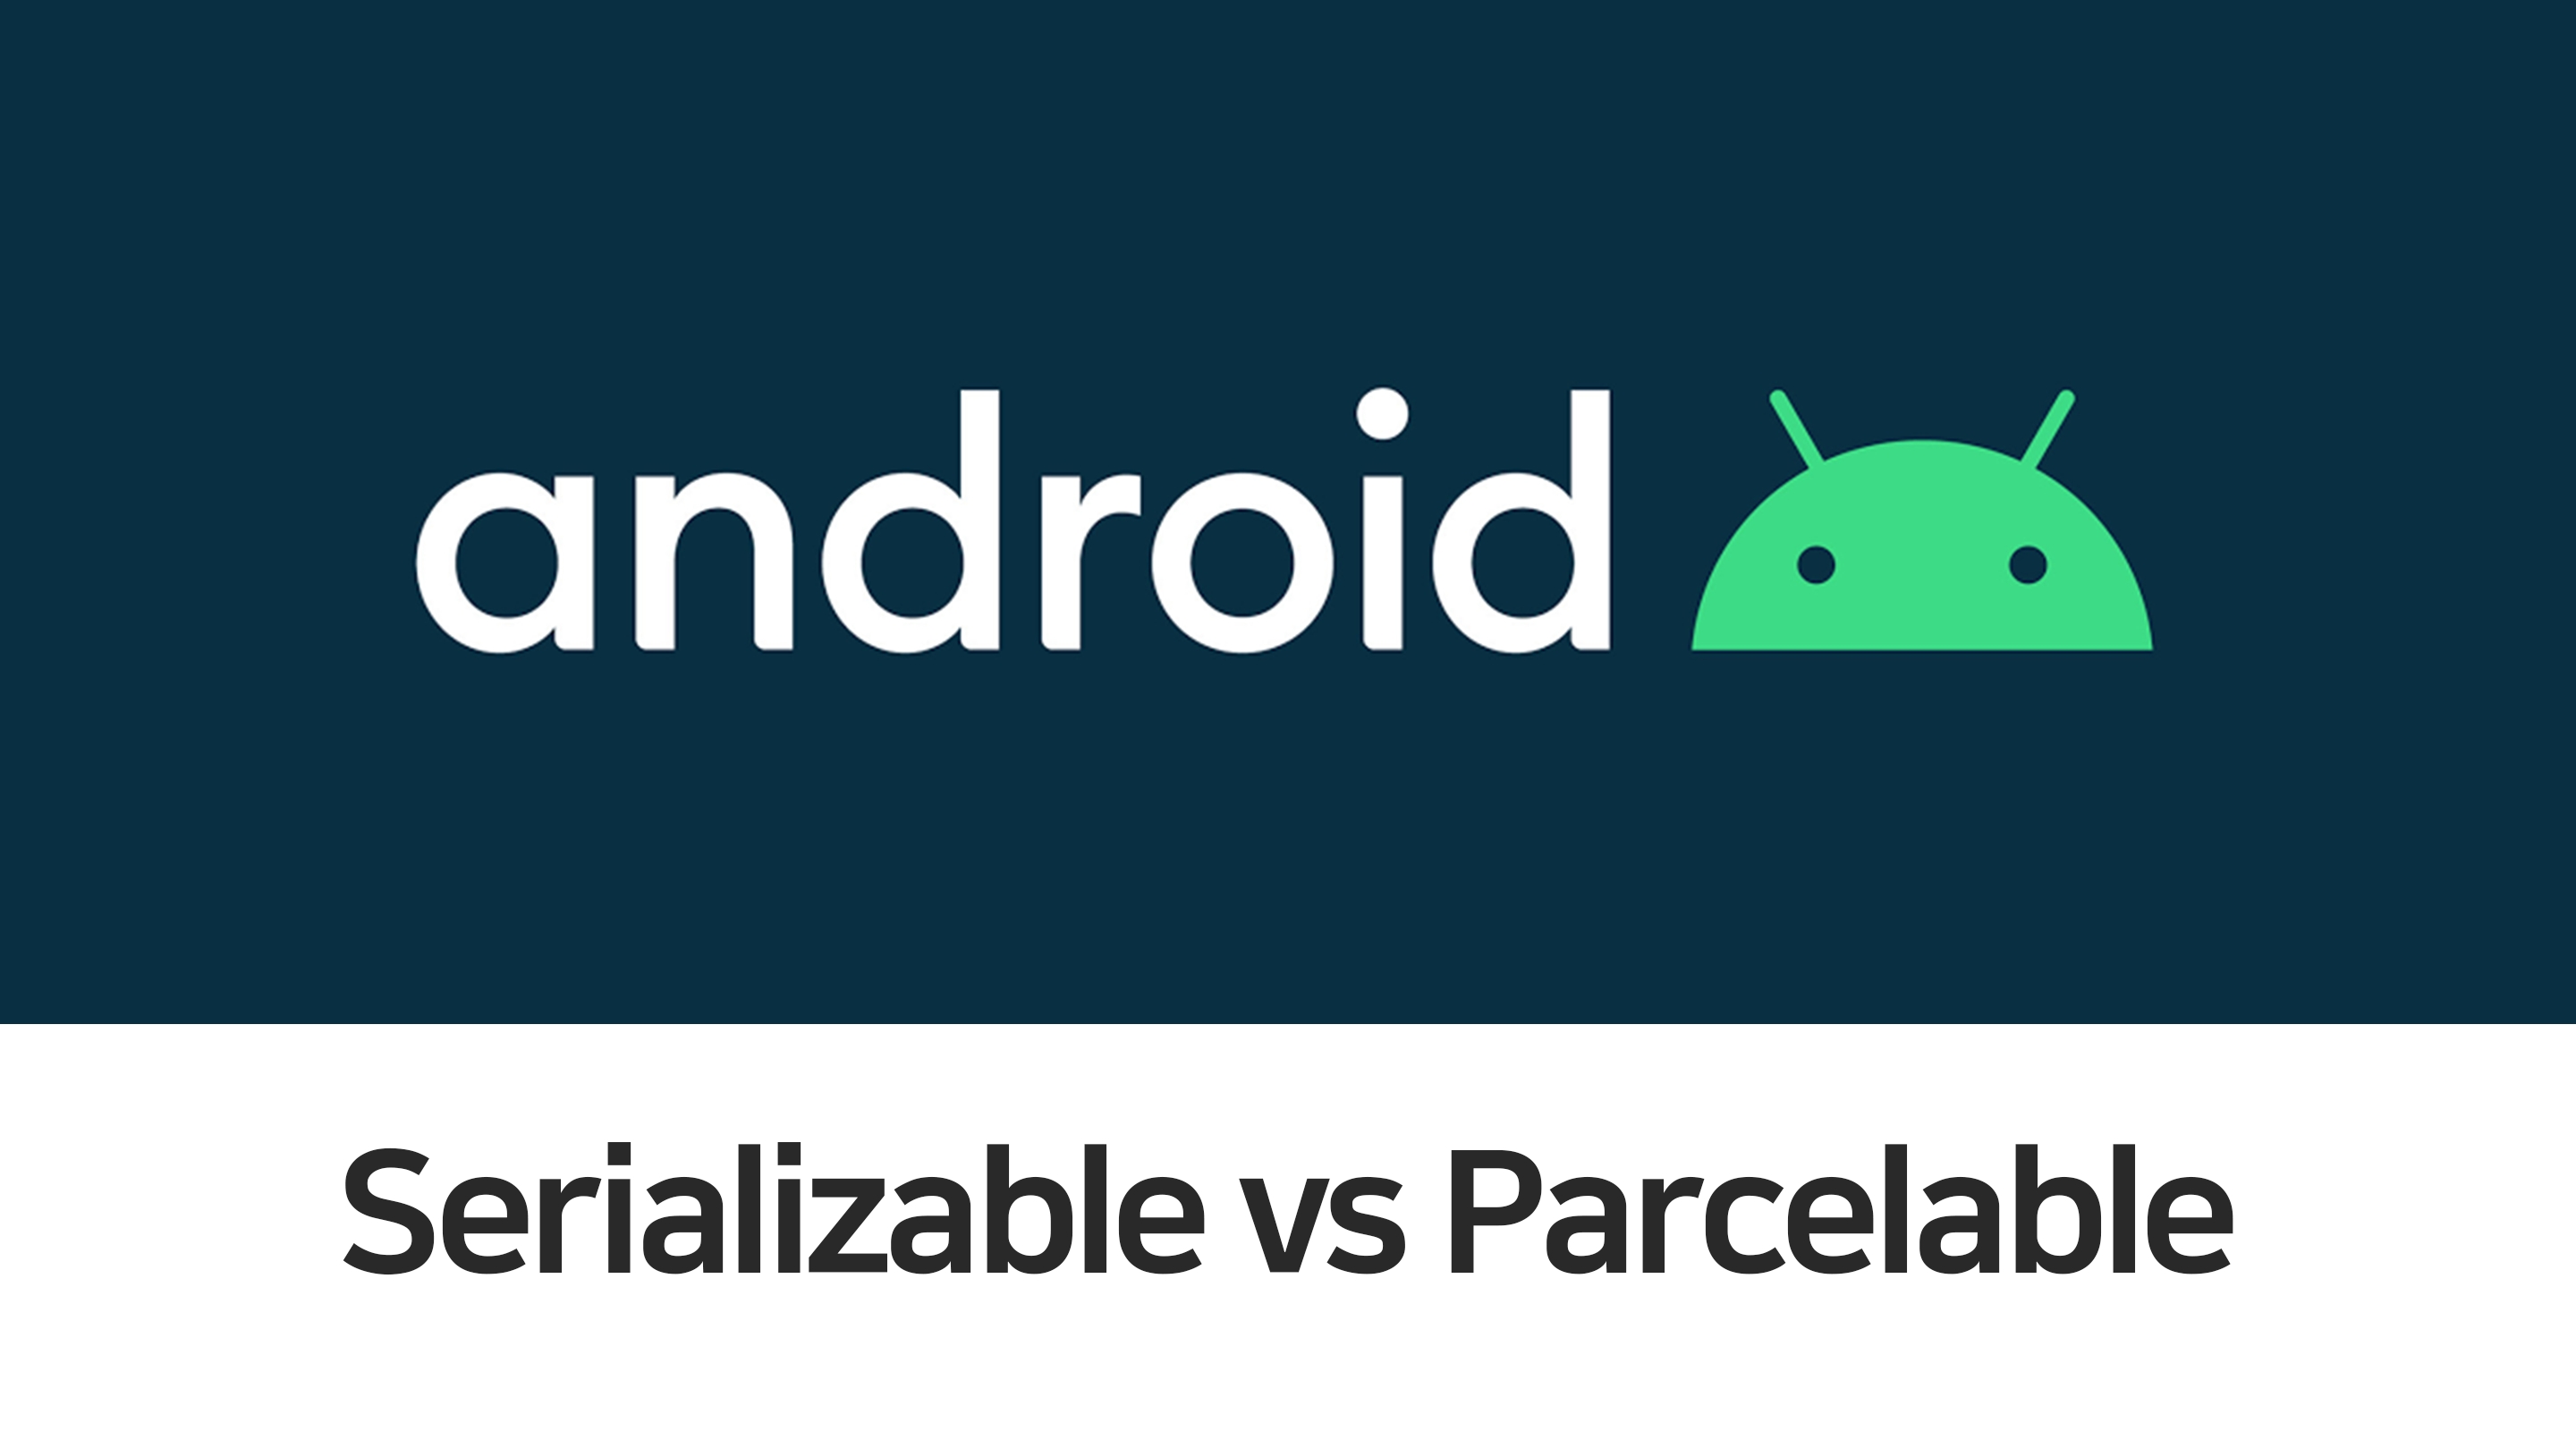 [Android] Serializable vs Parcelable